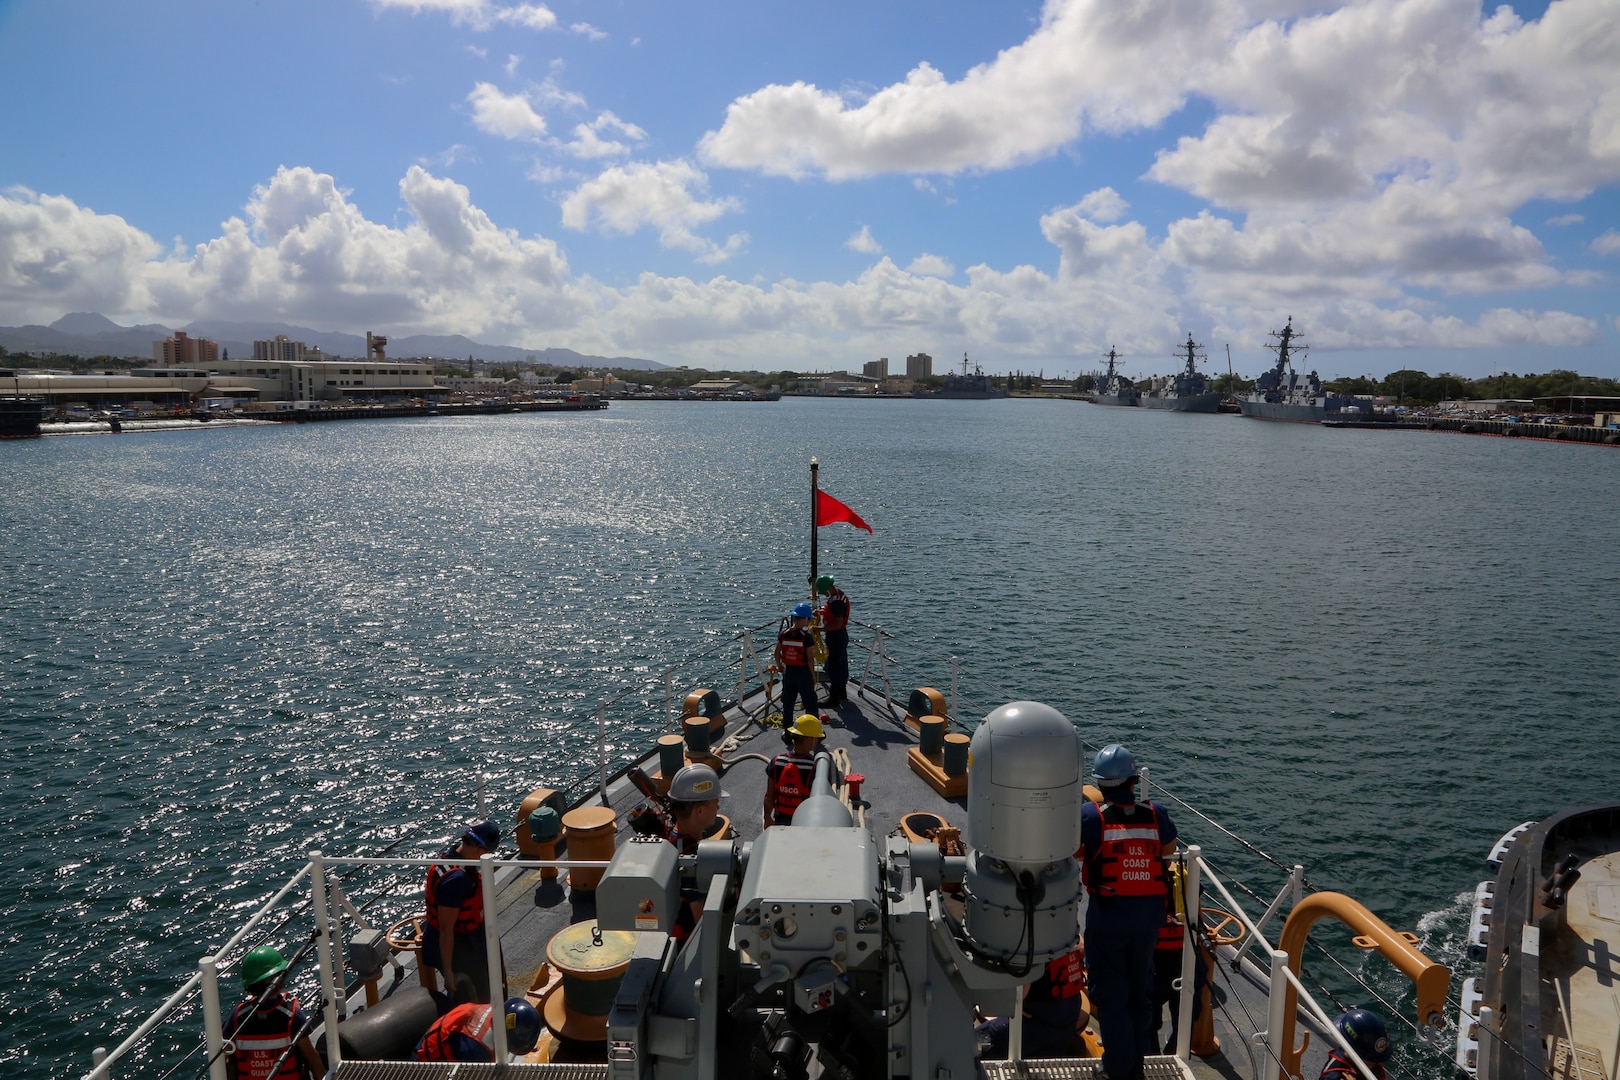 U.S. Coast Guard Cutter Harriet Lane (WMEC 903) crew renders honors to the Battleship Missouri Memorial as the Harriet Lane and crew return to home port in Pearl Harbor, Hawaii, April 9, 2024. Harriet Lane and crew departed Pearl Harbor in January and traveled more than 15,000 nautical miles spanning from the Hawaiian Islands to the east coast of Australia. Patrolling in support of Operation Blue Pacific, the cutter and crew worked alongside Pacific Island nations to forge and advance relationships with like-minded allies and partners who share a common vision for maritime governance. (U.S. Coast Guard photo by Senior Chief Petty Officer Charly Tautfest)